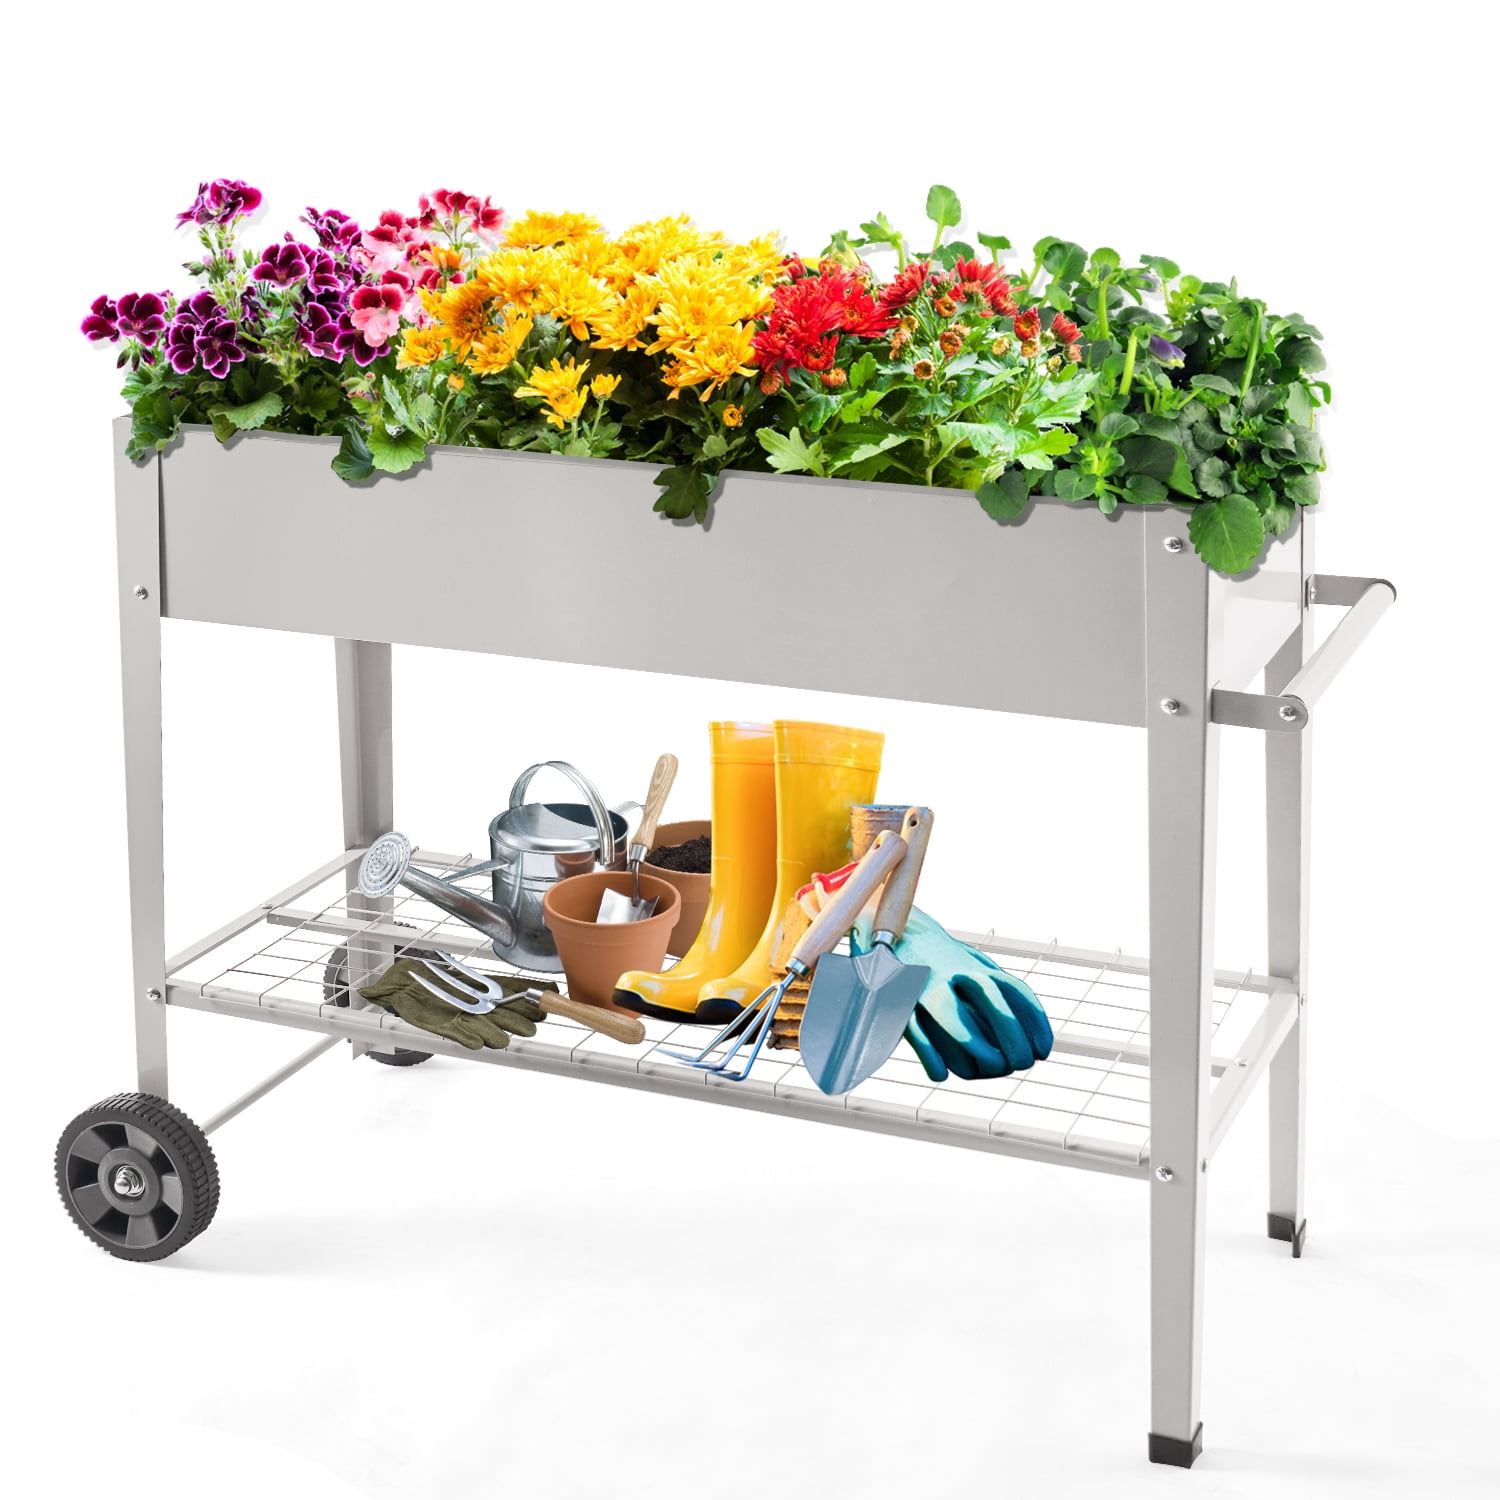 FOYUEE Raised Planter Box with Legs Outdoor Elevated Garden Bed On Wheels for Vegetables Flower Herb Patio